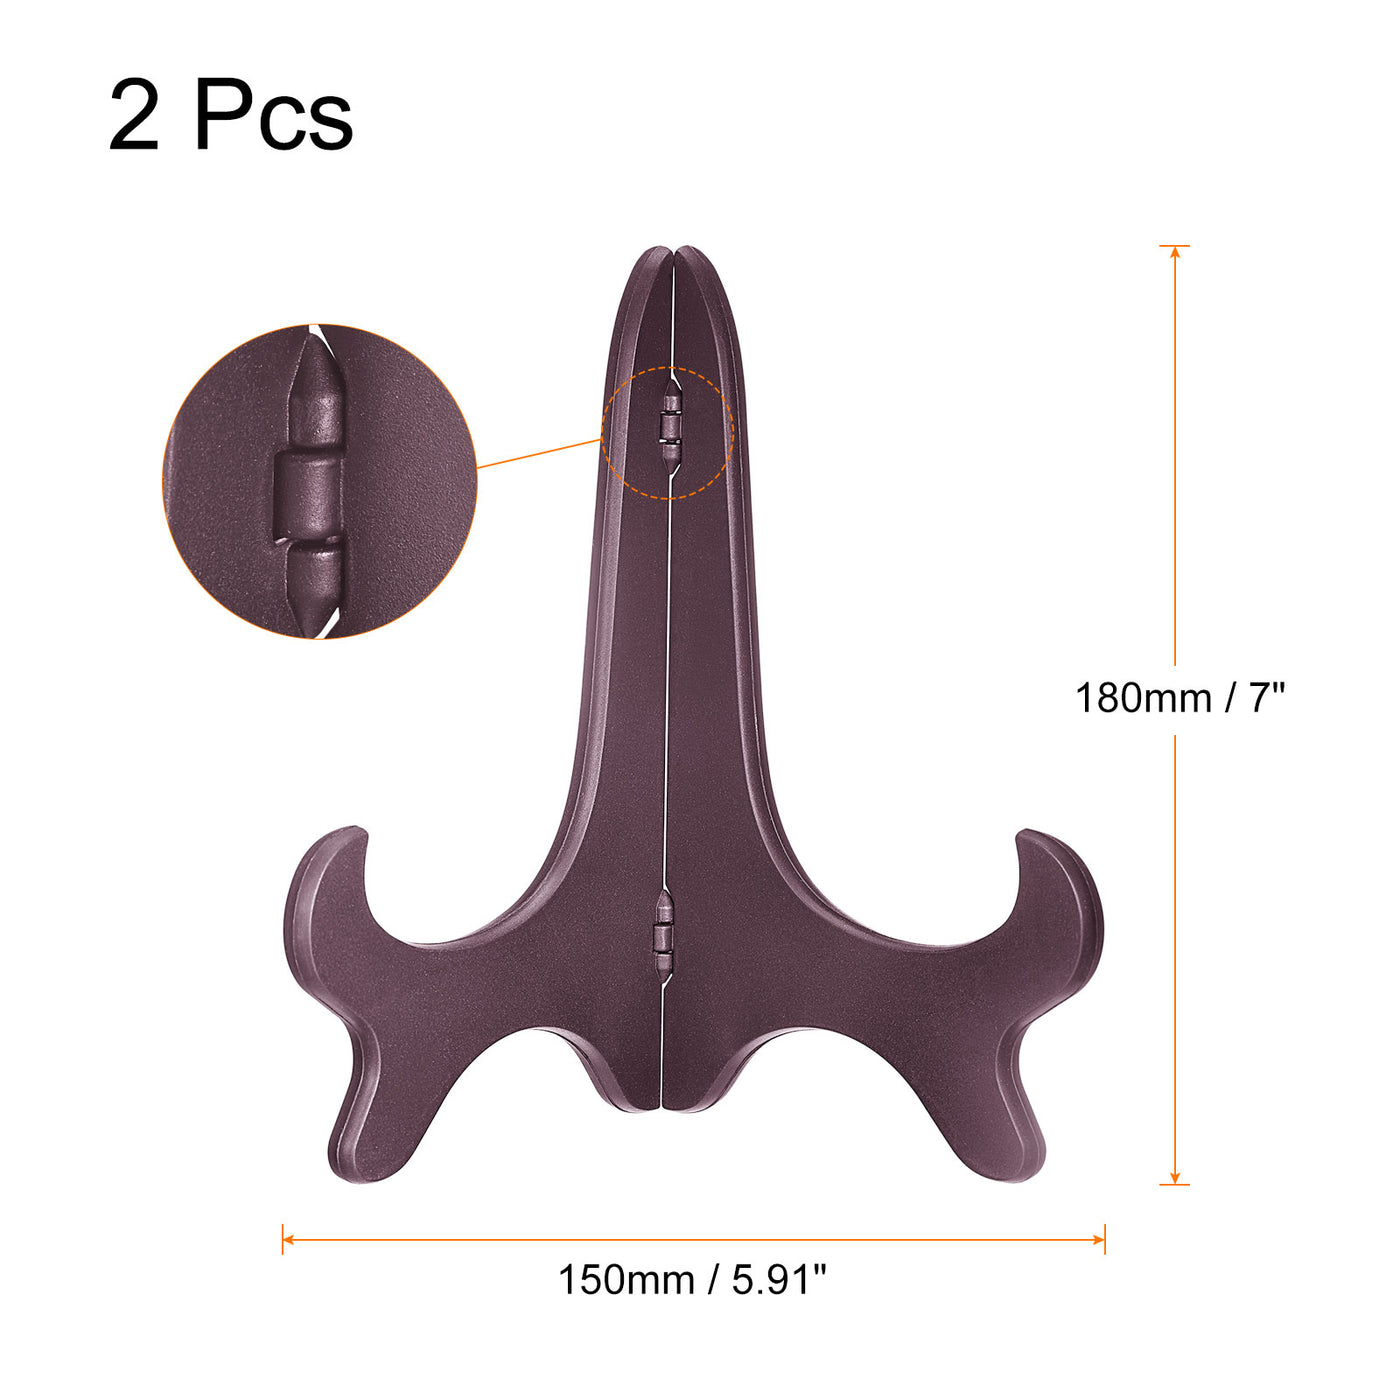 uxcell Uxcell 2pcs 7" Easel Plate Holder, Wood-like Plastic Folding Display Stand Purple for Decorative Picture Frame